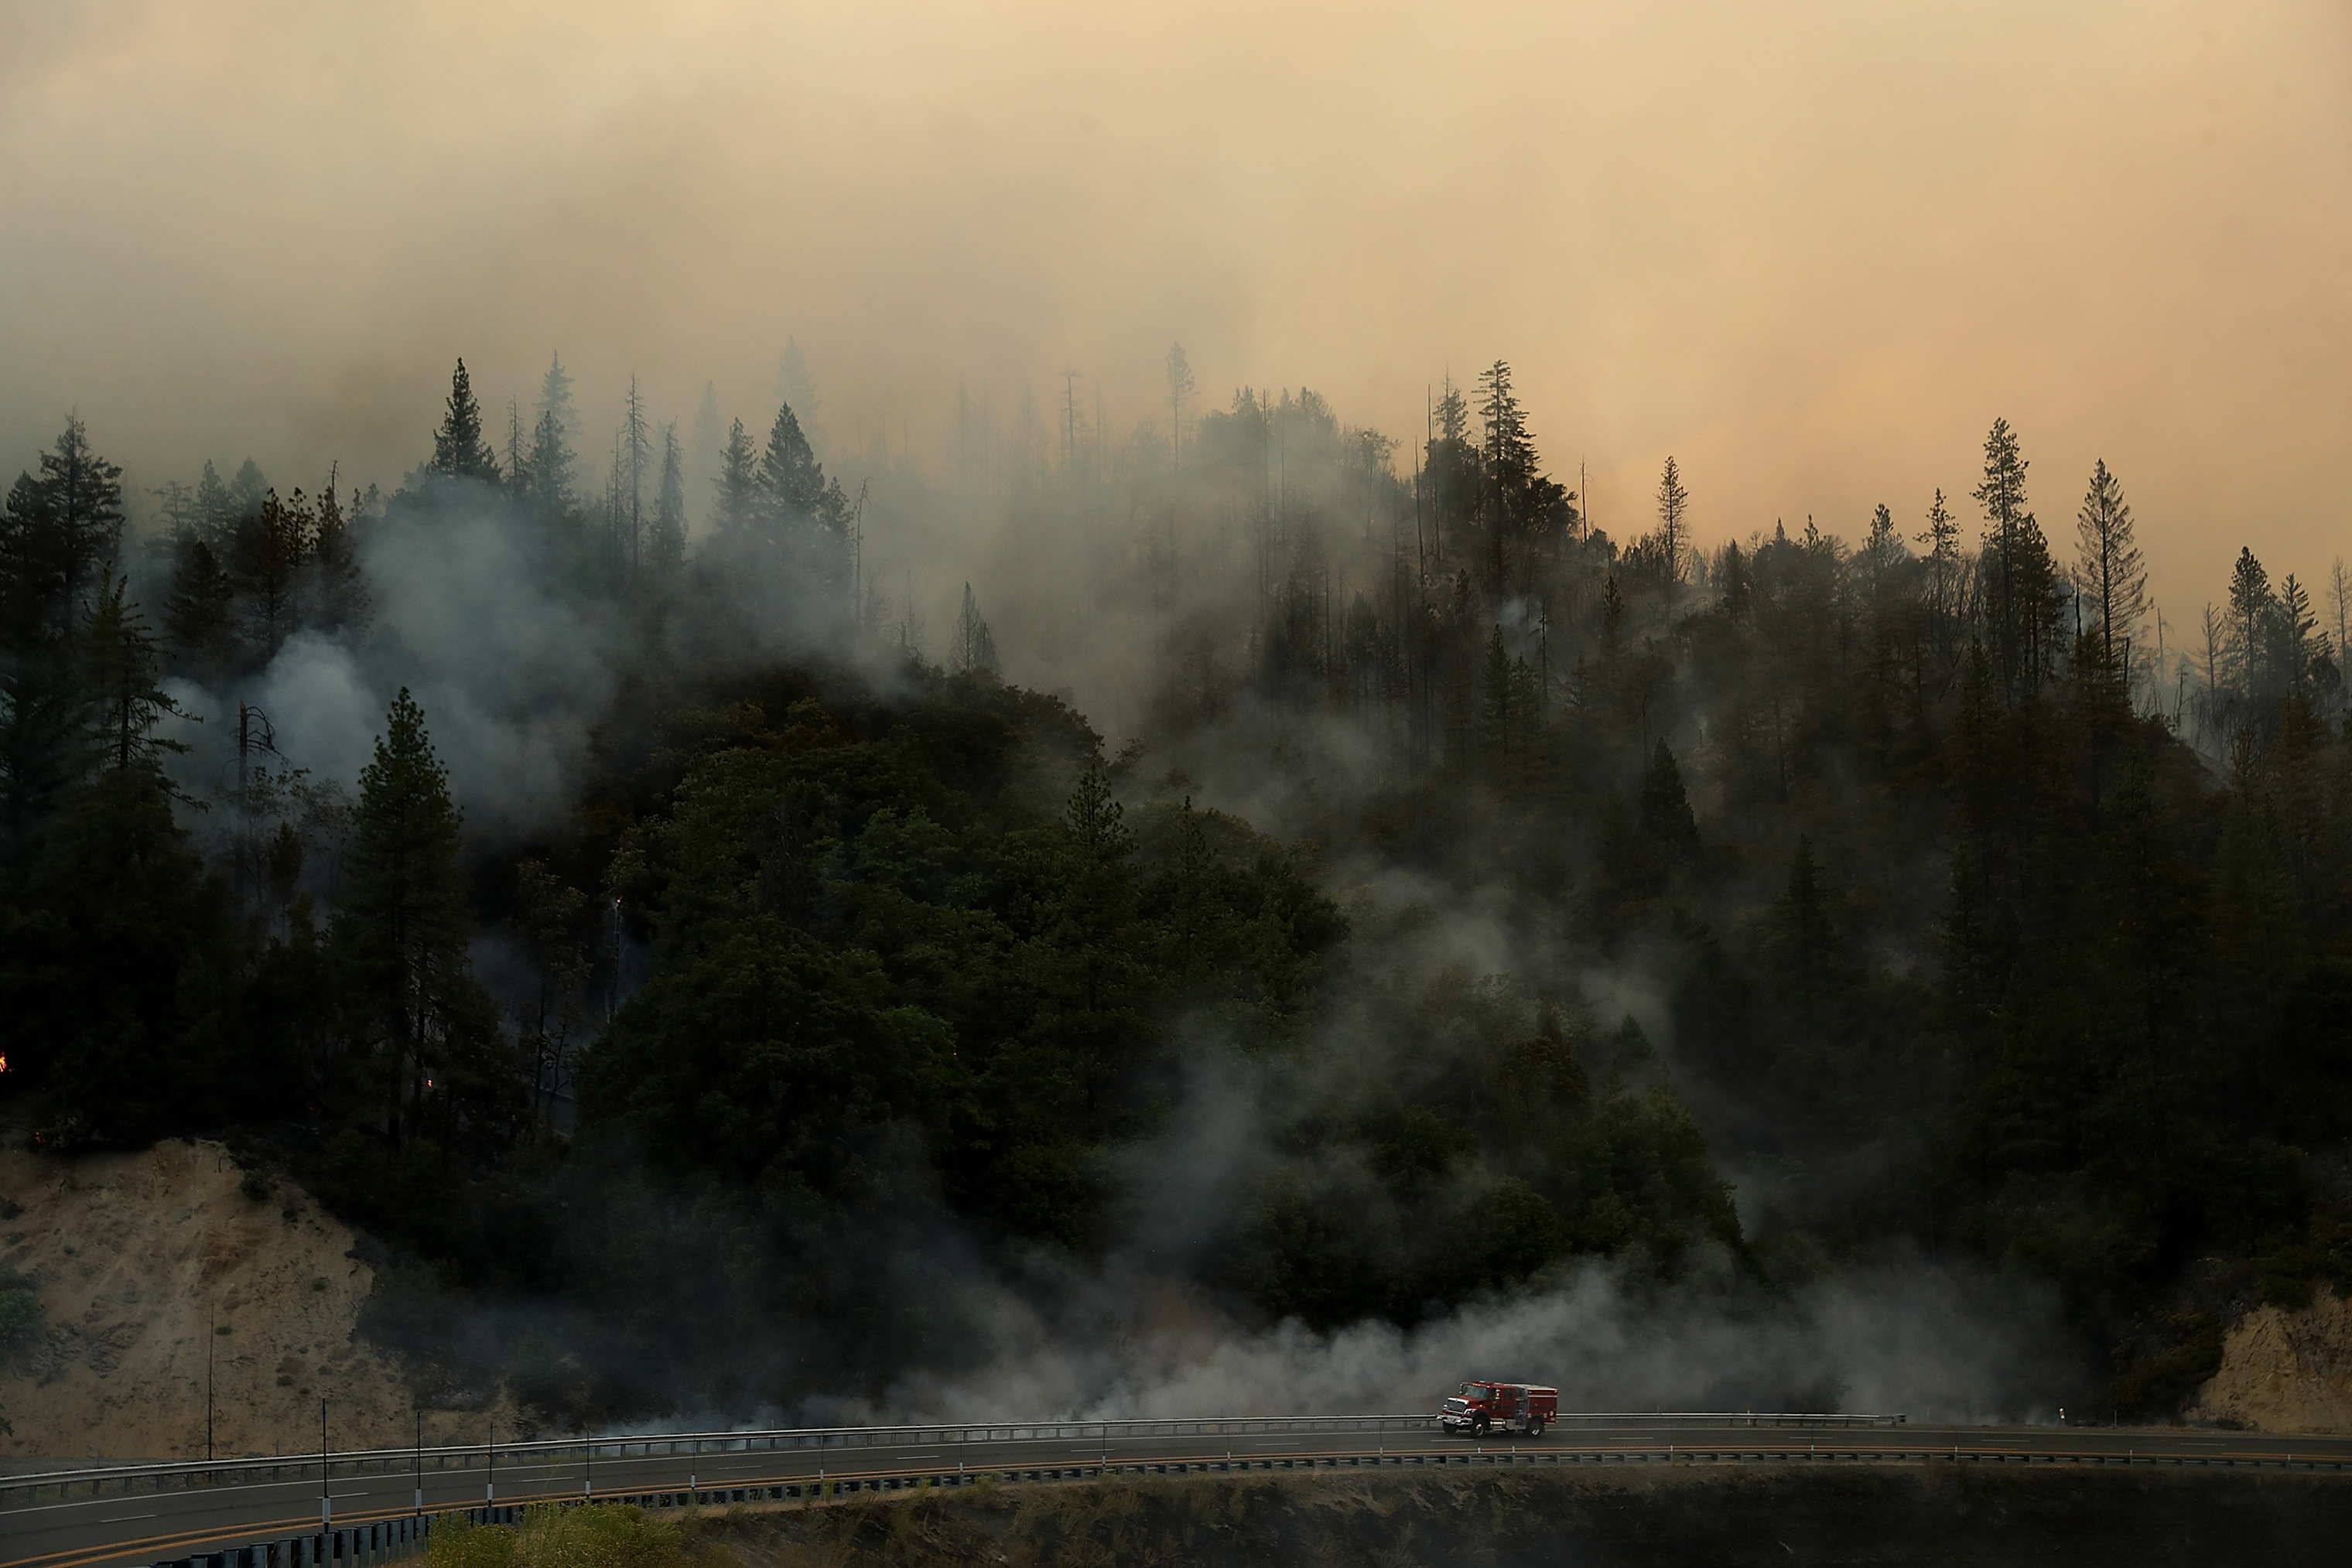 A Cal Fire truck drives along highway 299 as the Carr Fire burns in the hills near Whiskeytown, Calif. on July 28. (Justin Sullivan—Getty Images)